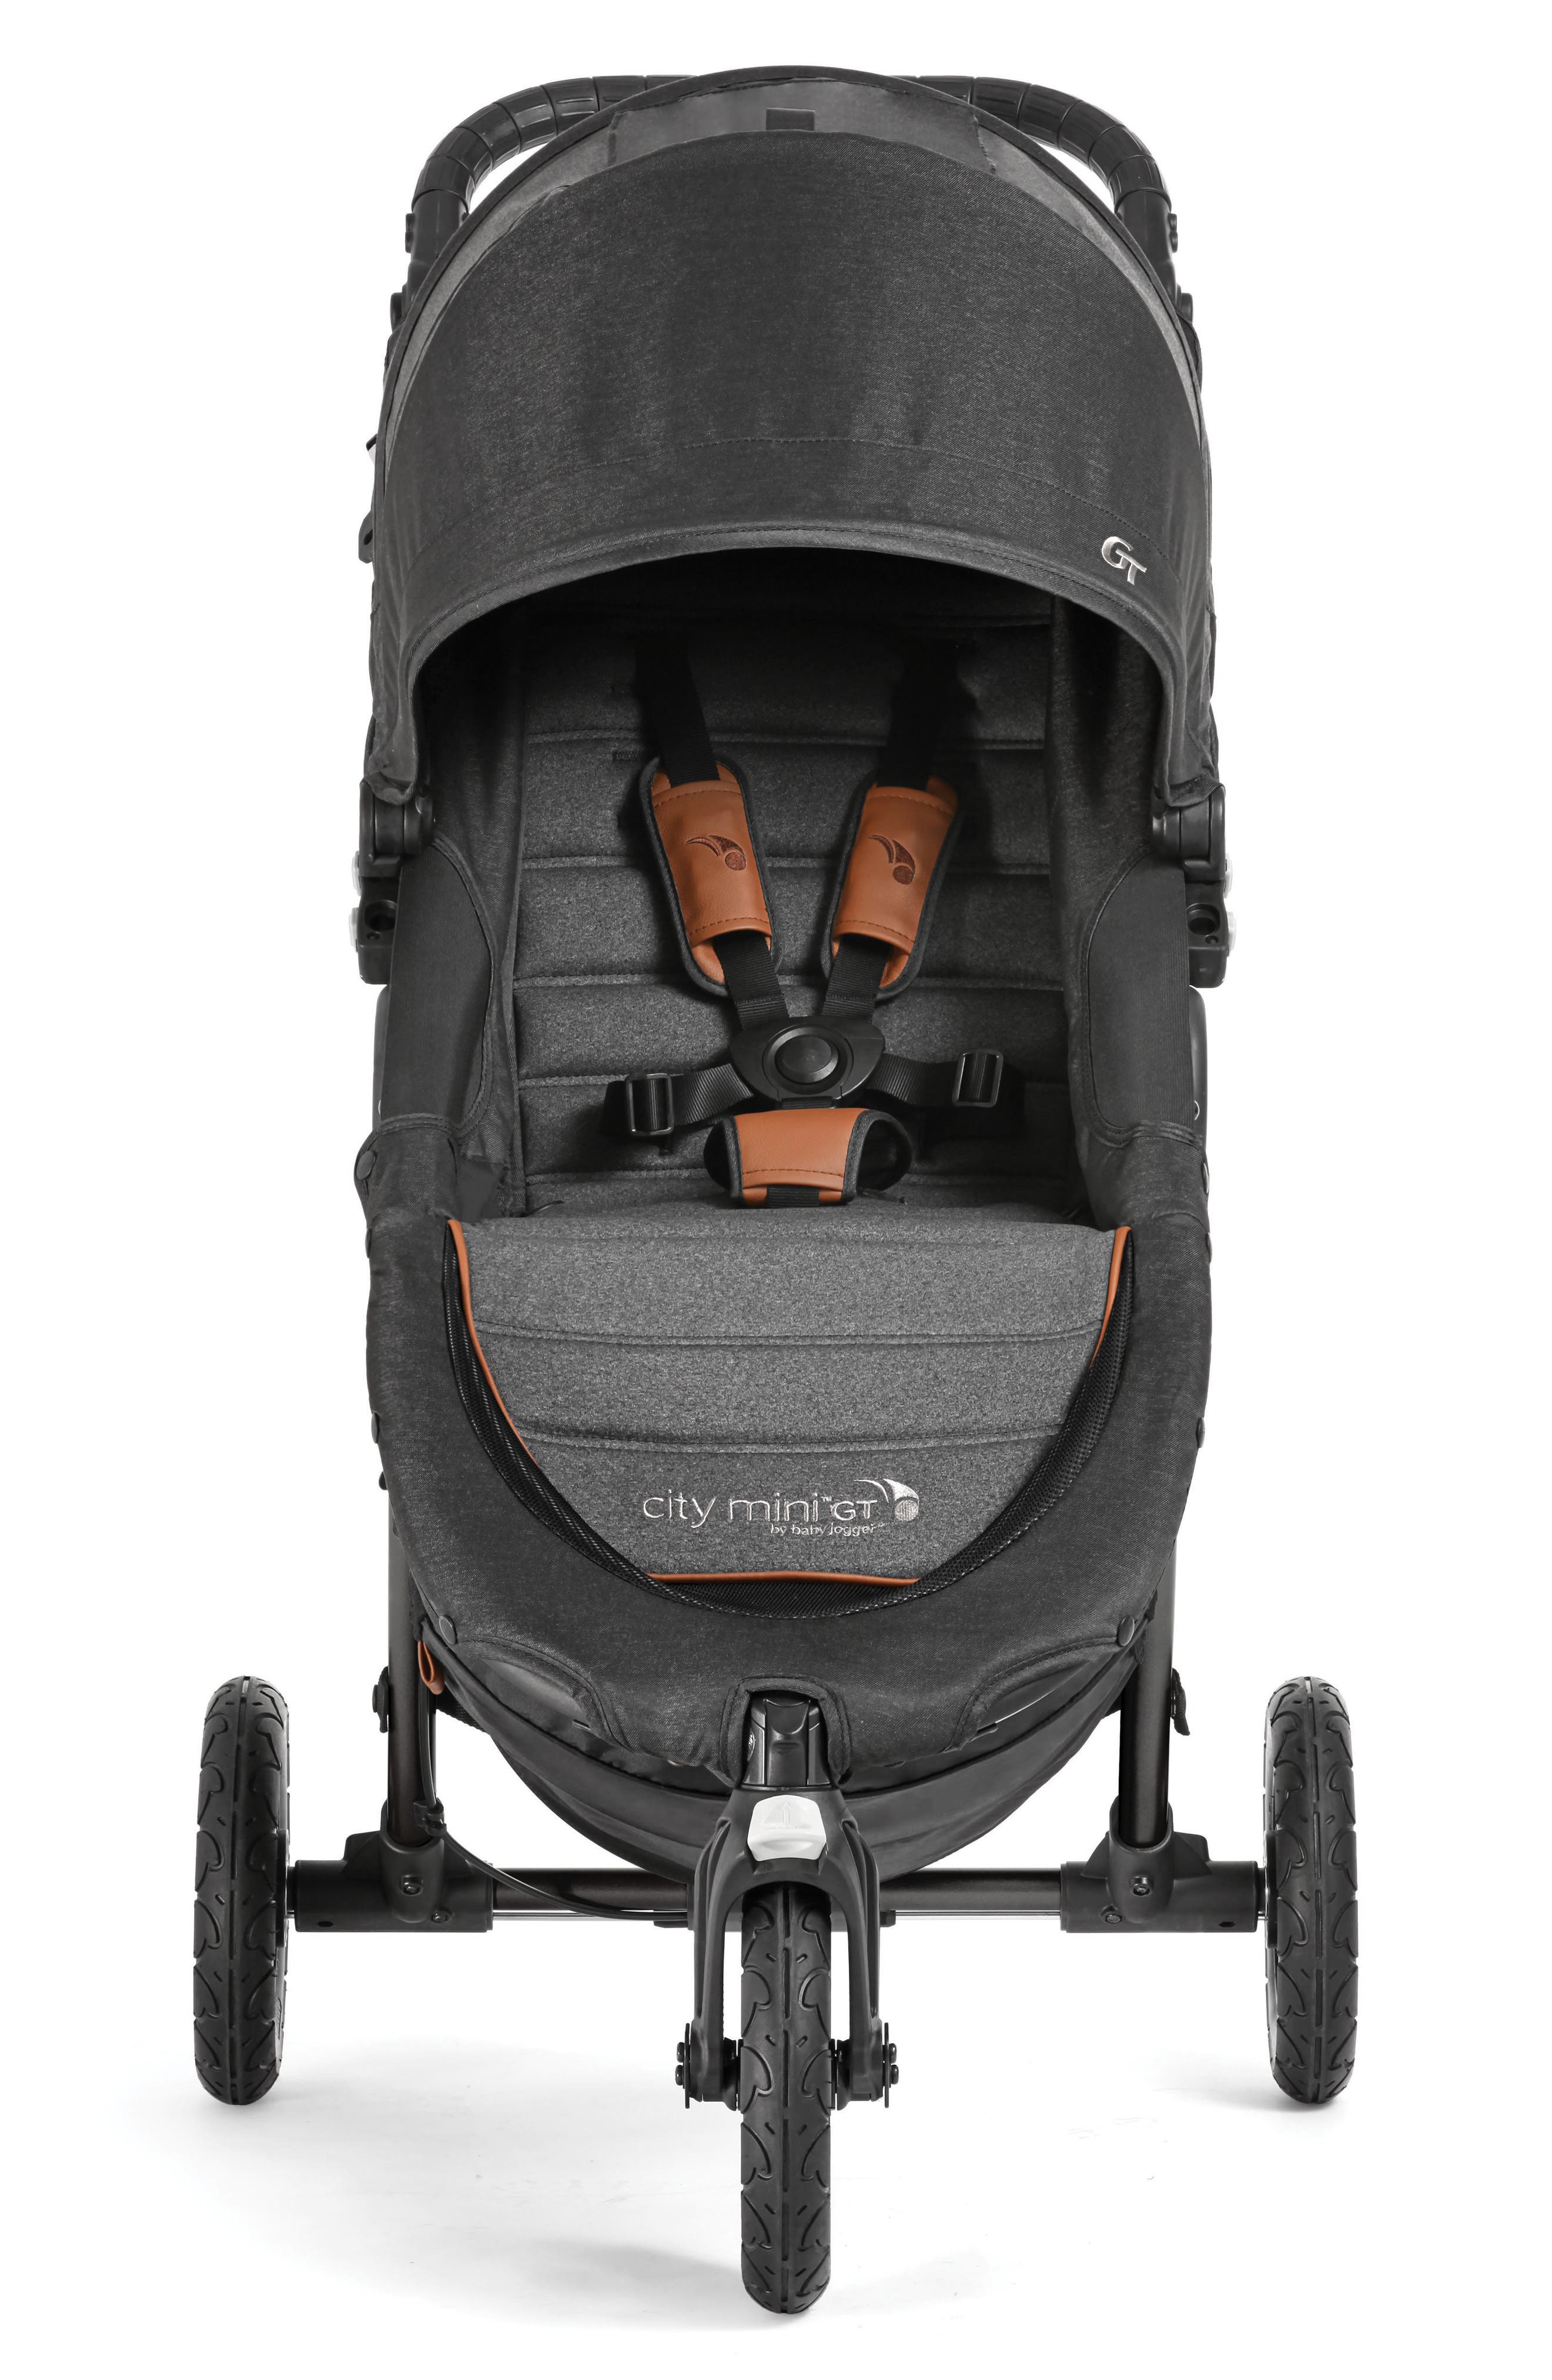 baby jogger gt